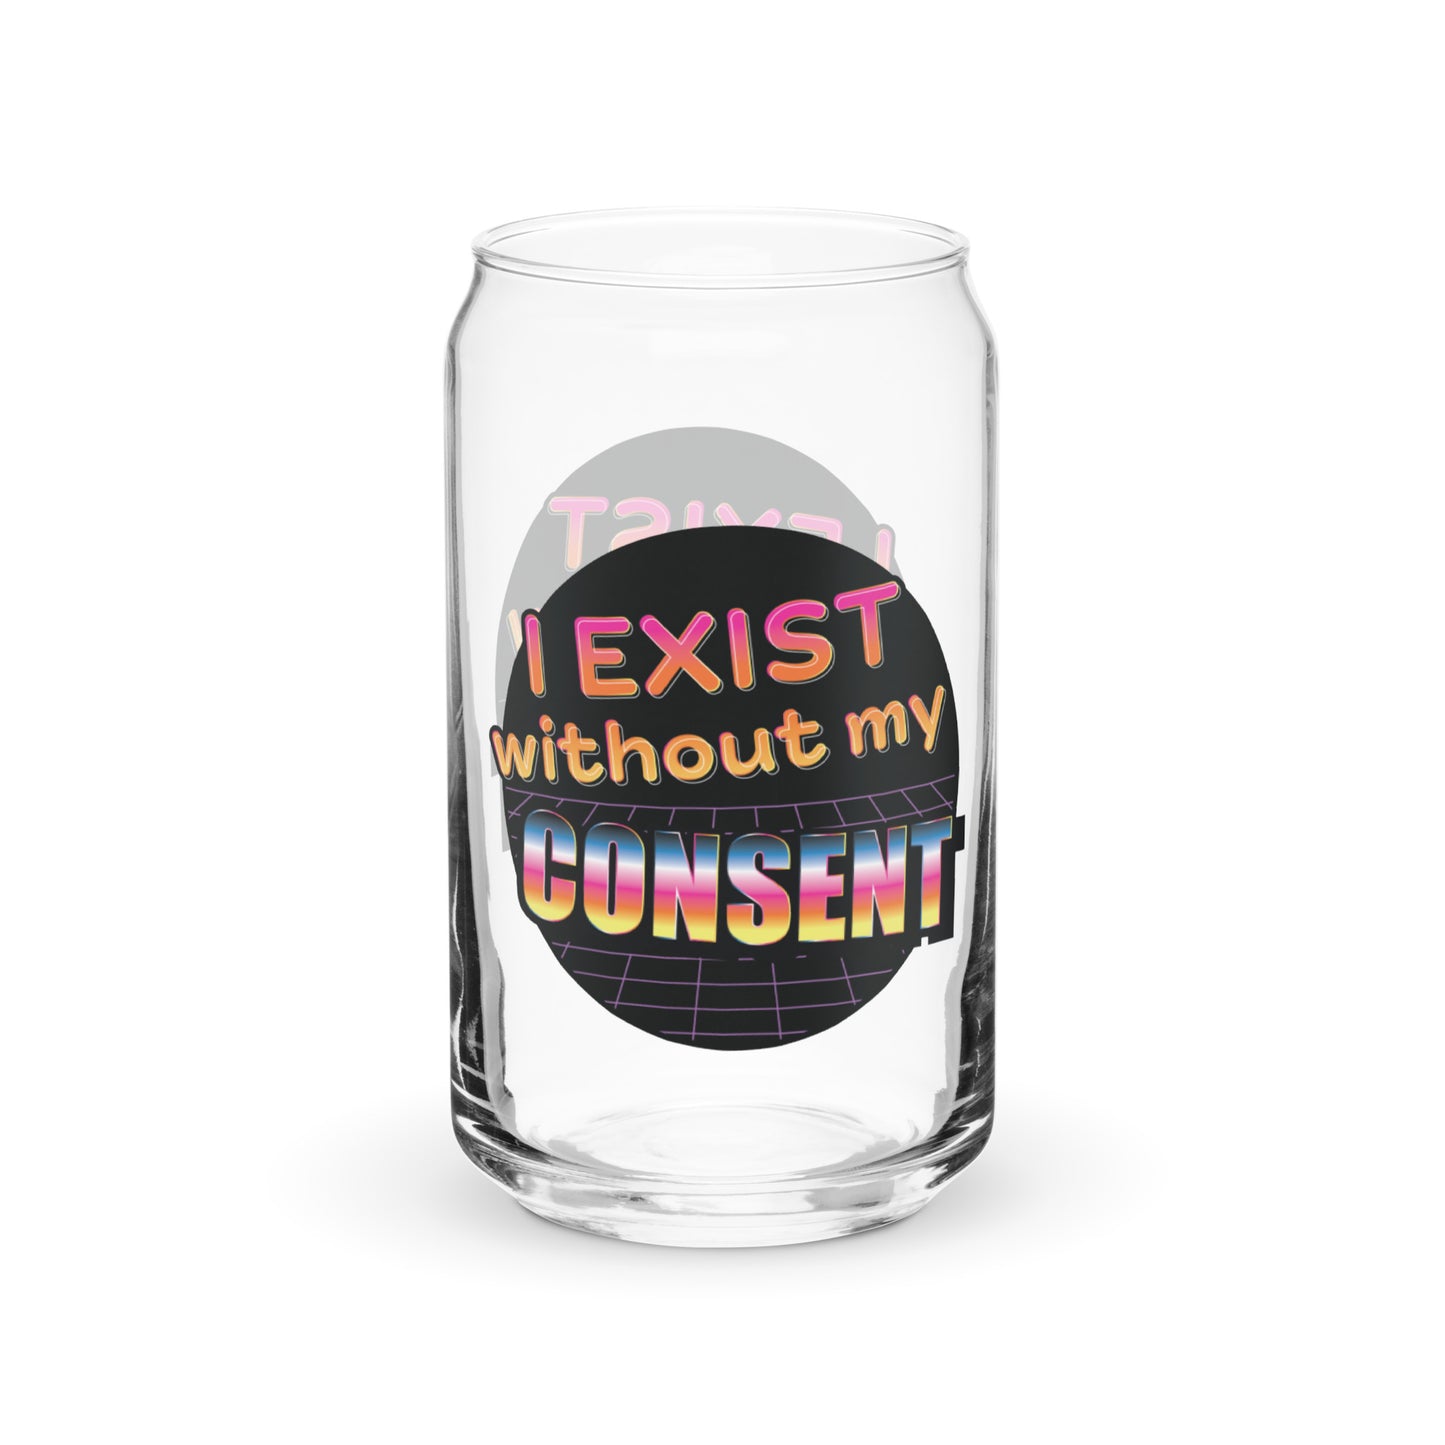 A can-shaped glass featuring an 80's style graphic with brightly colored text that reads "I exist without my consent"